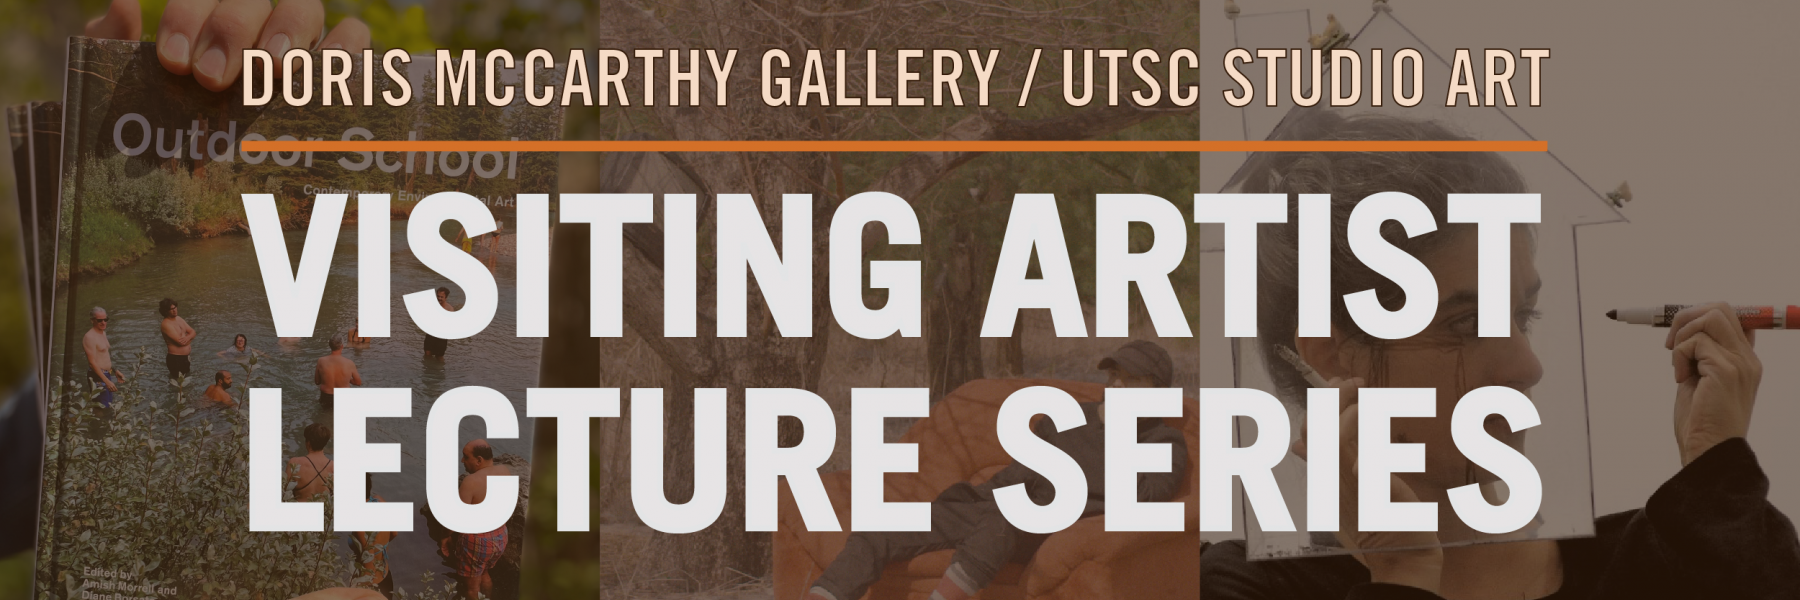 Visiting Artist Lecture Series Summer 2021 Banner